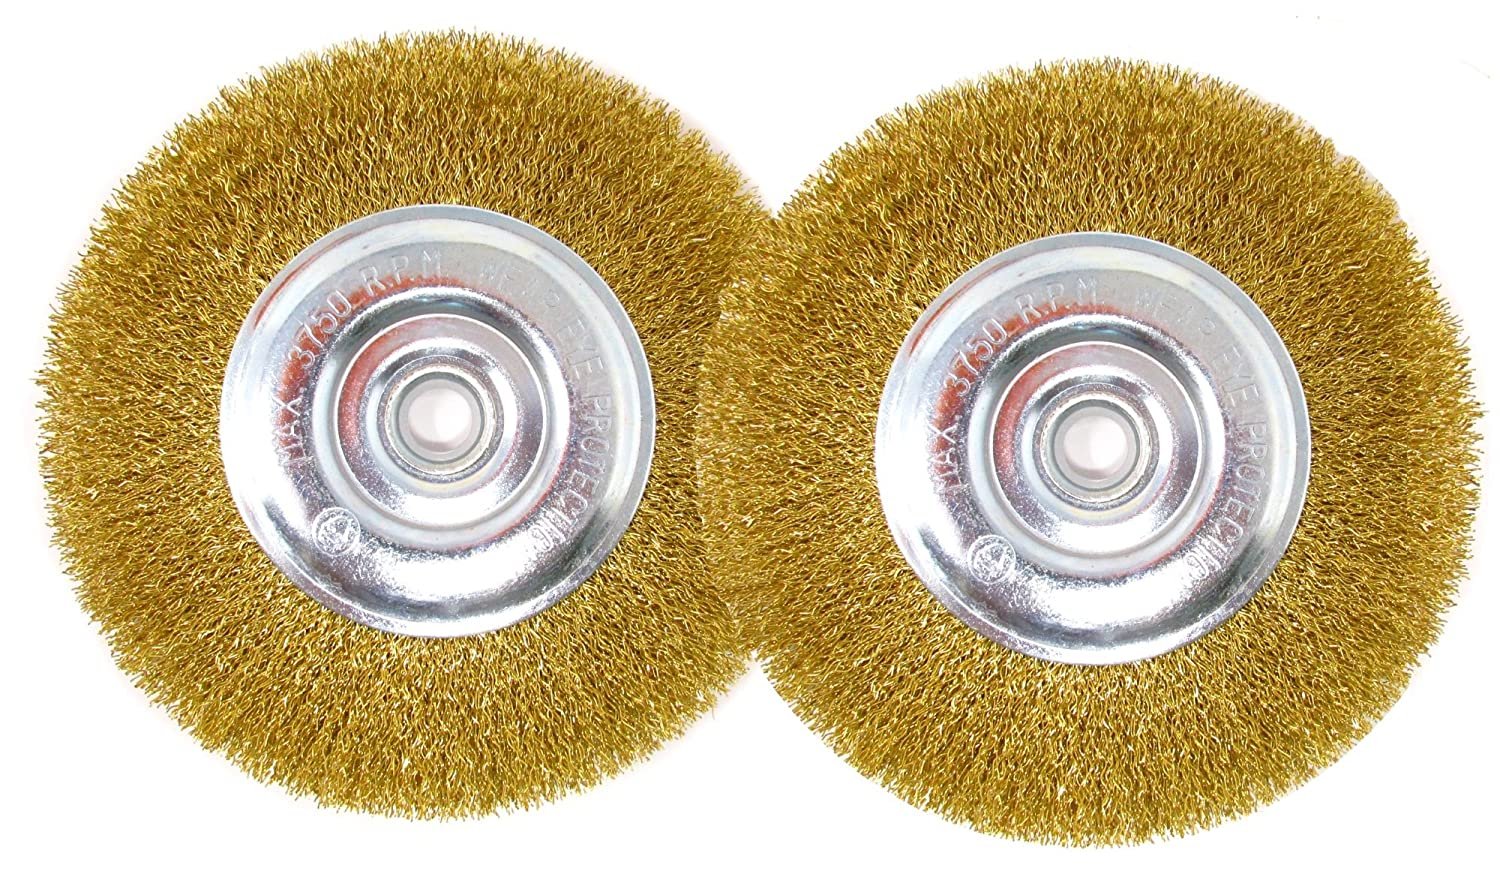 6-Inch Wire Wheel Brush Set for Bench Grinder, Brass Coated, Pack of 2